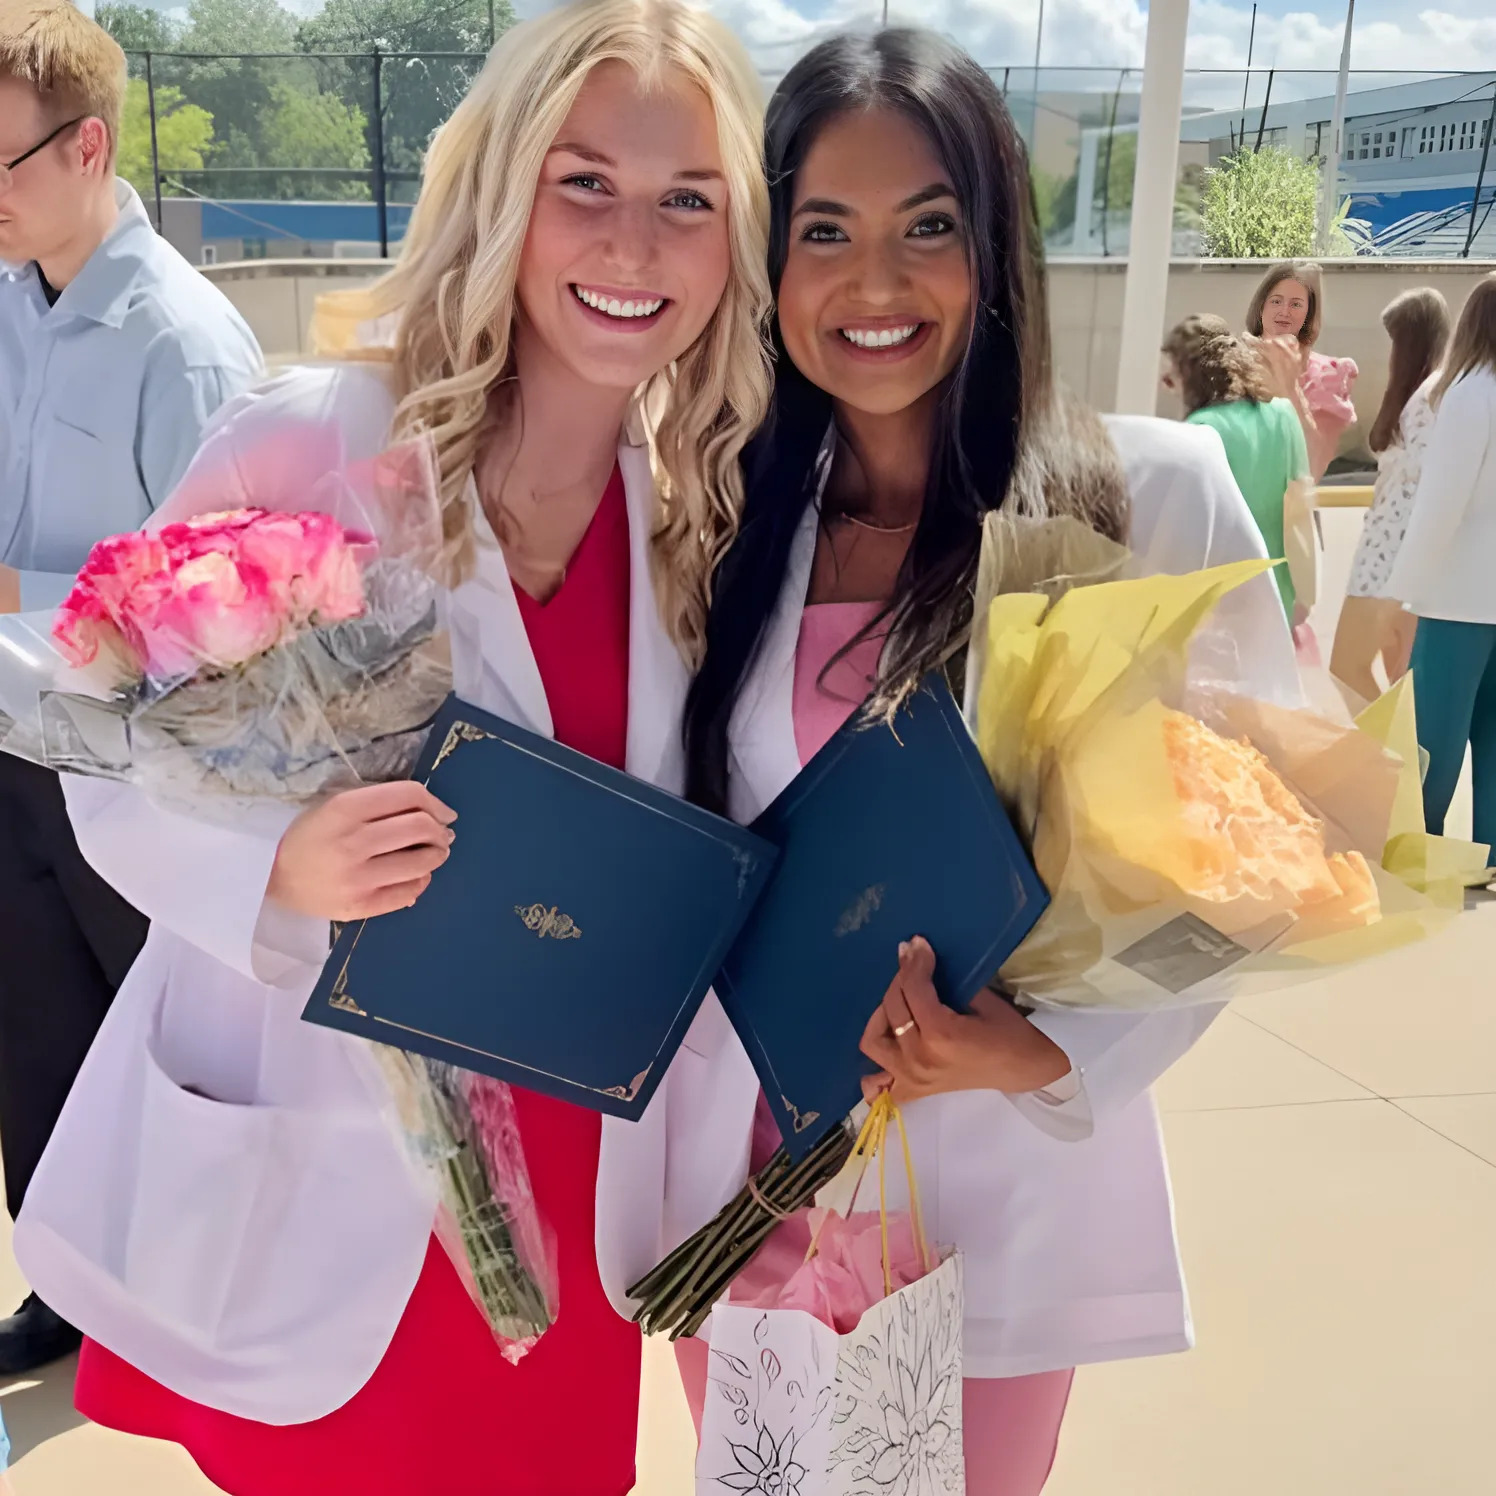 two women holding flowers and diplomas